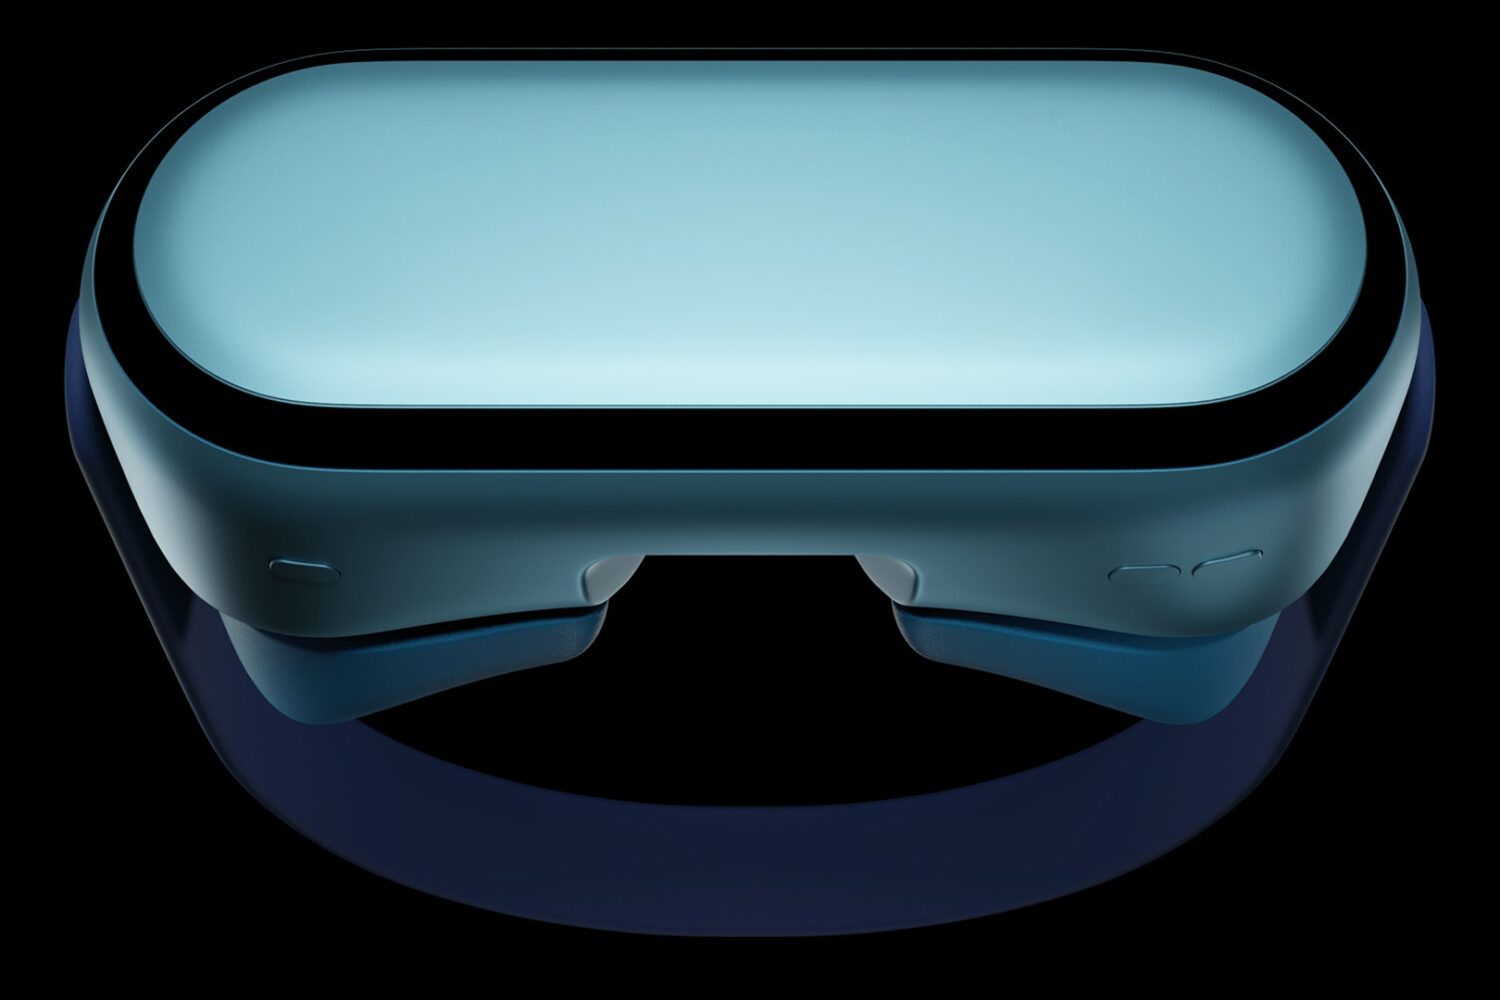 A head-worn mixed reality Apple headset device is imagined in this concept